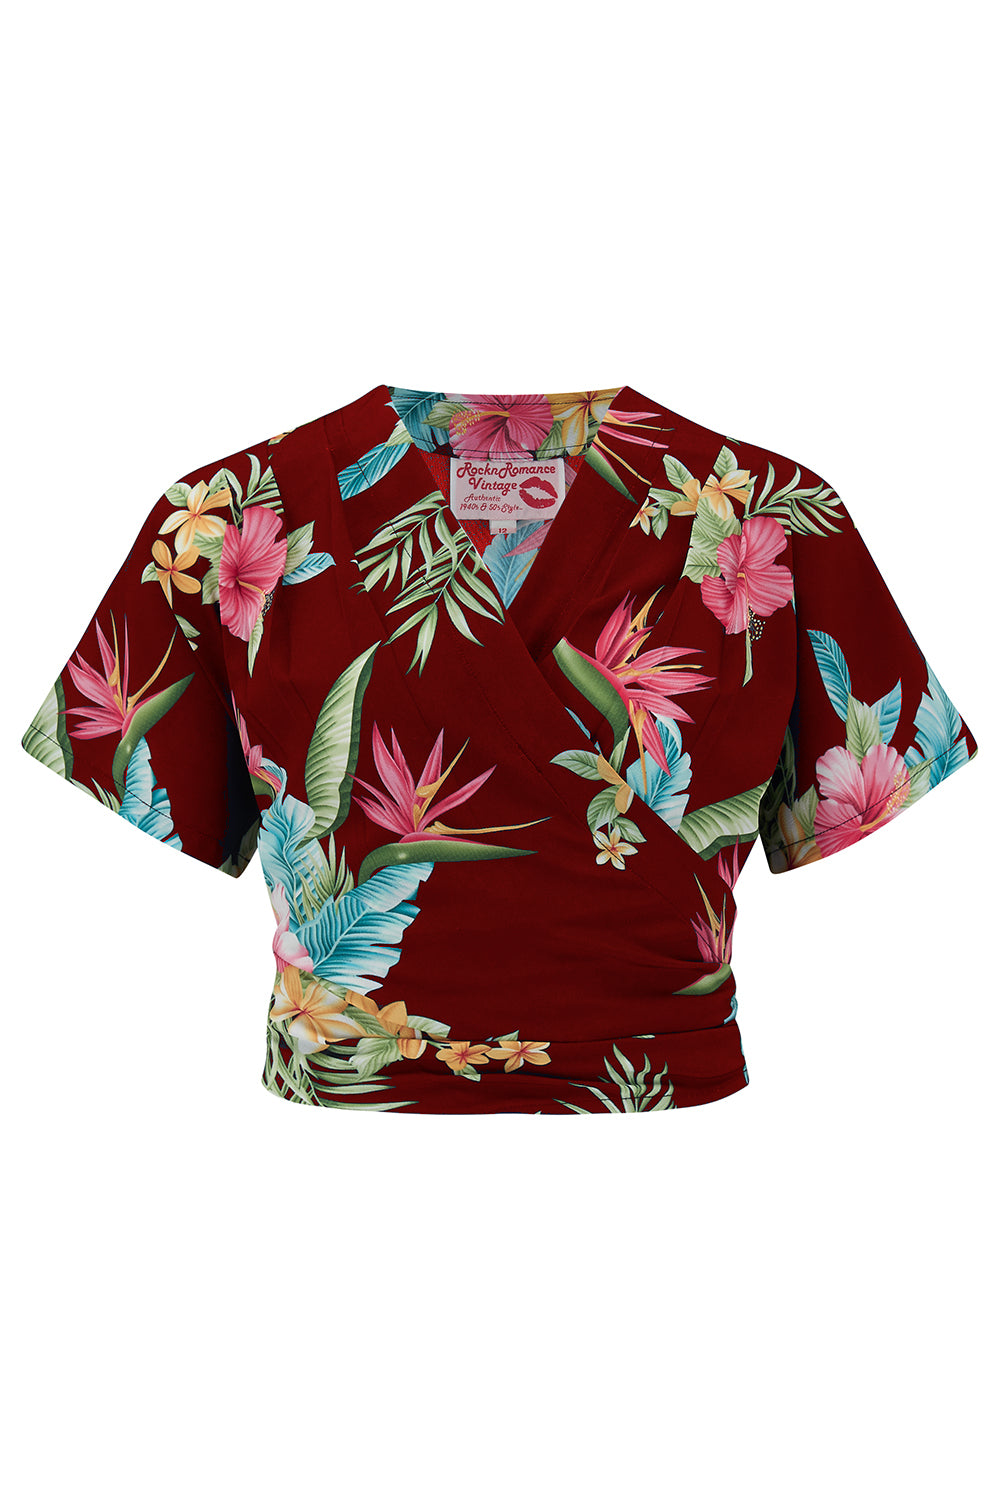 The "Darla" Short Sleeve Wrap Blouse in Wine Honolulu Print, True Vintage Style - True and authentic vintage style clothing, inspired by the Classic styles of CC41 , WW2 and the fun 1950s RocknRoll era, for everyday wear plus events like Goodwood Revival, Twinwood Festival and Viva Las Vegas Rockabilly Weekend Rock n Romance Rock n Romance